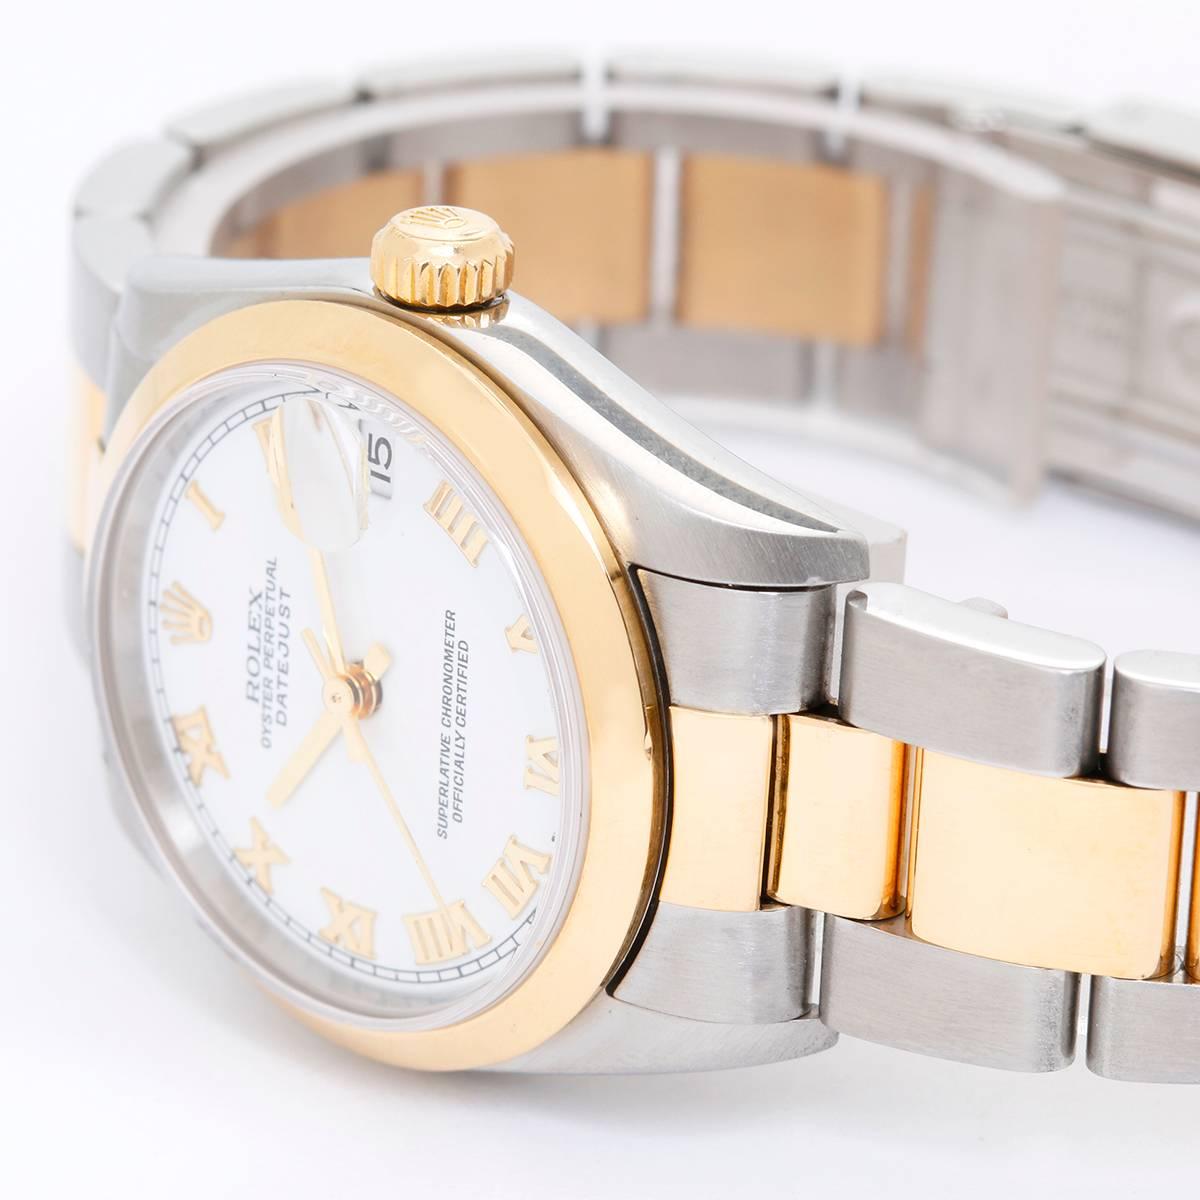 Rolex Datejust midsize 2-Tone Watch 178243 -  Automatic winding, 31 jewels, Quickset, sapphire crystal. Stainless steel case with 18k yellow gold smooth bezel (31mm diameter). White dial with Roman numerals. Stainless steel and 18k yellow gold